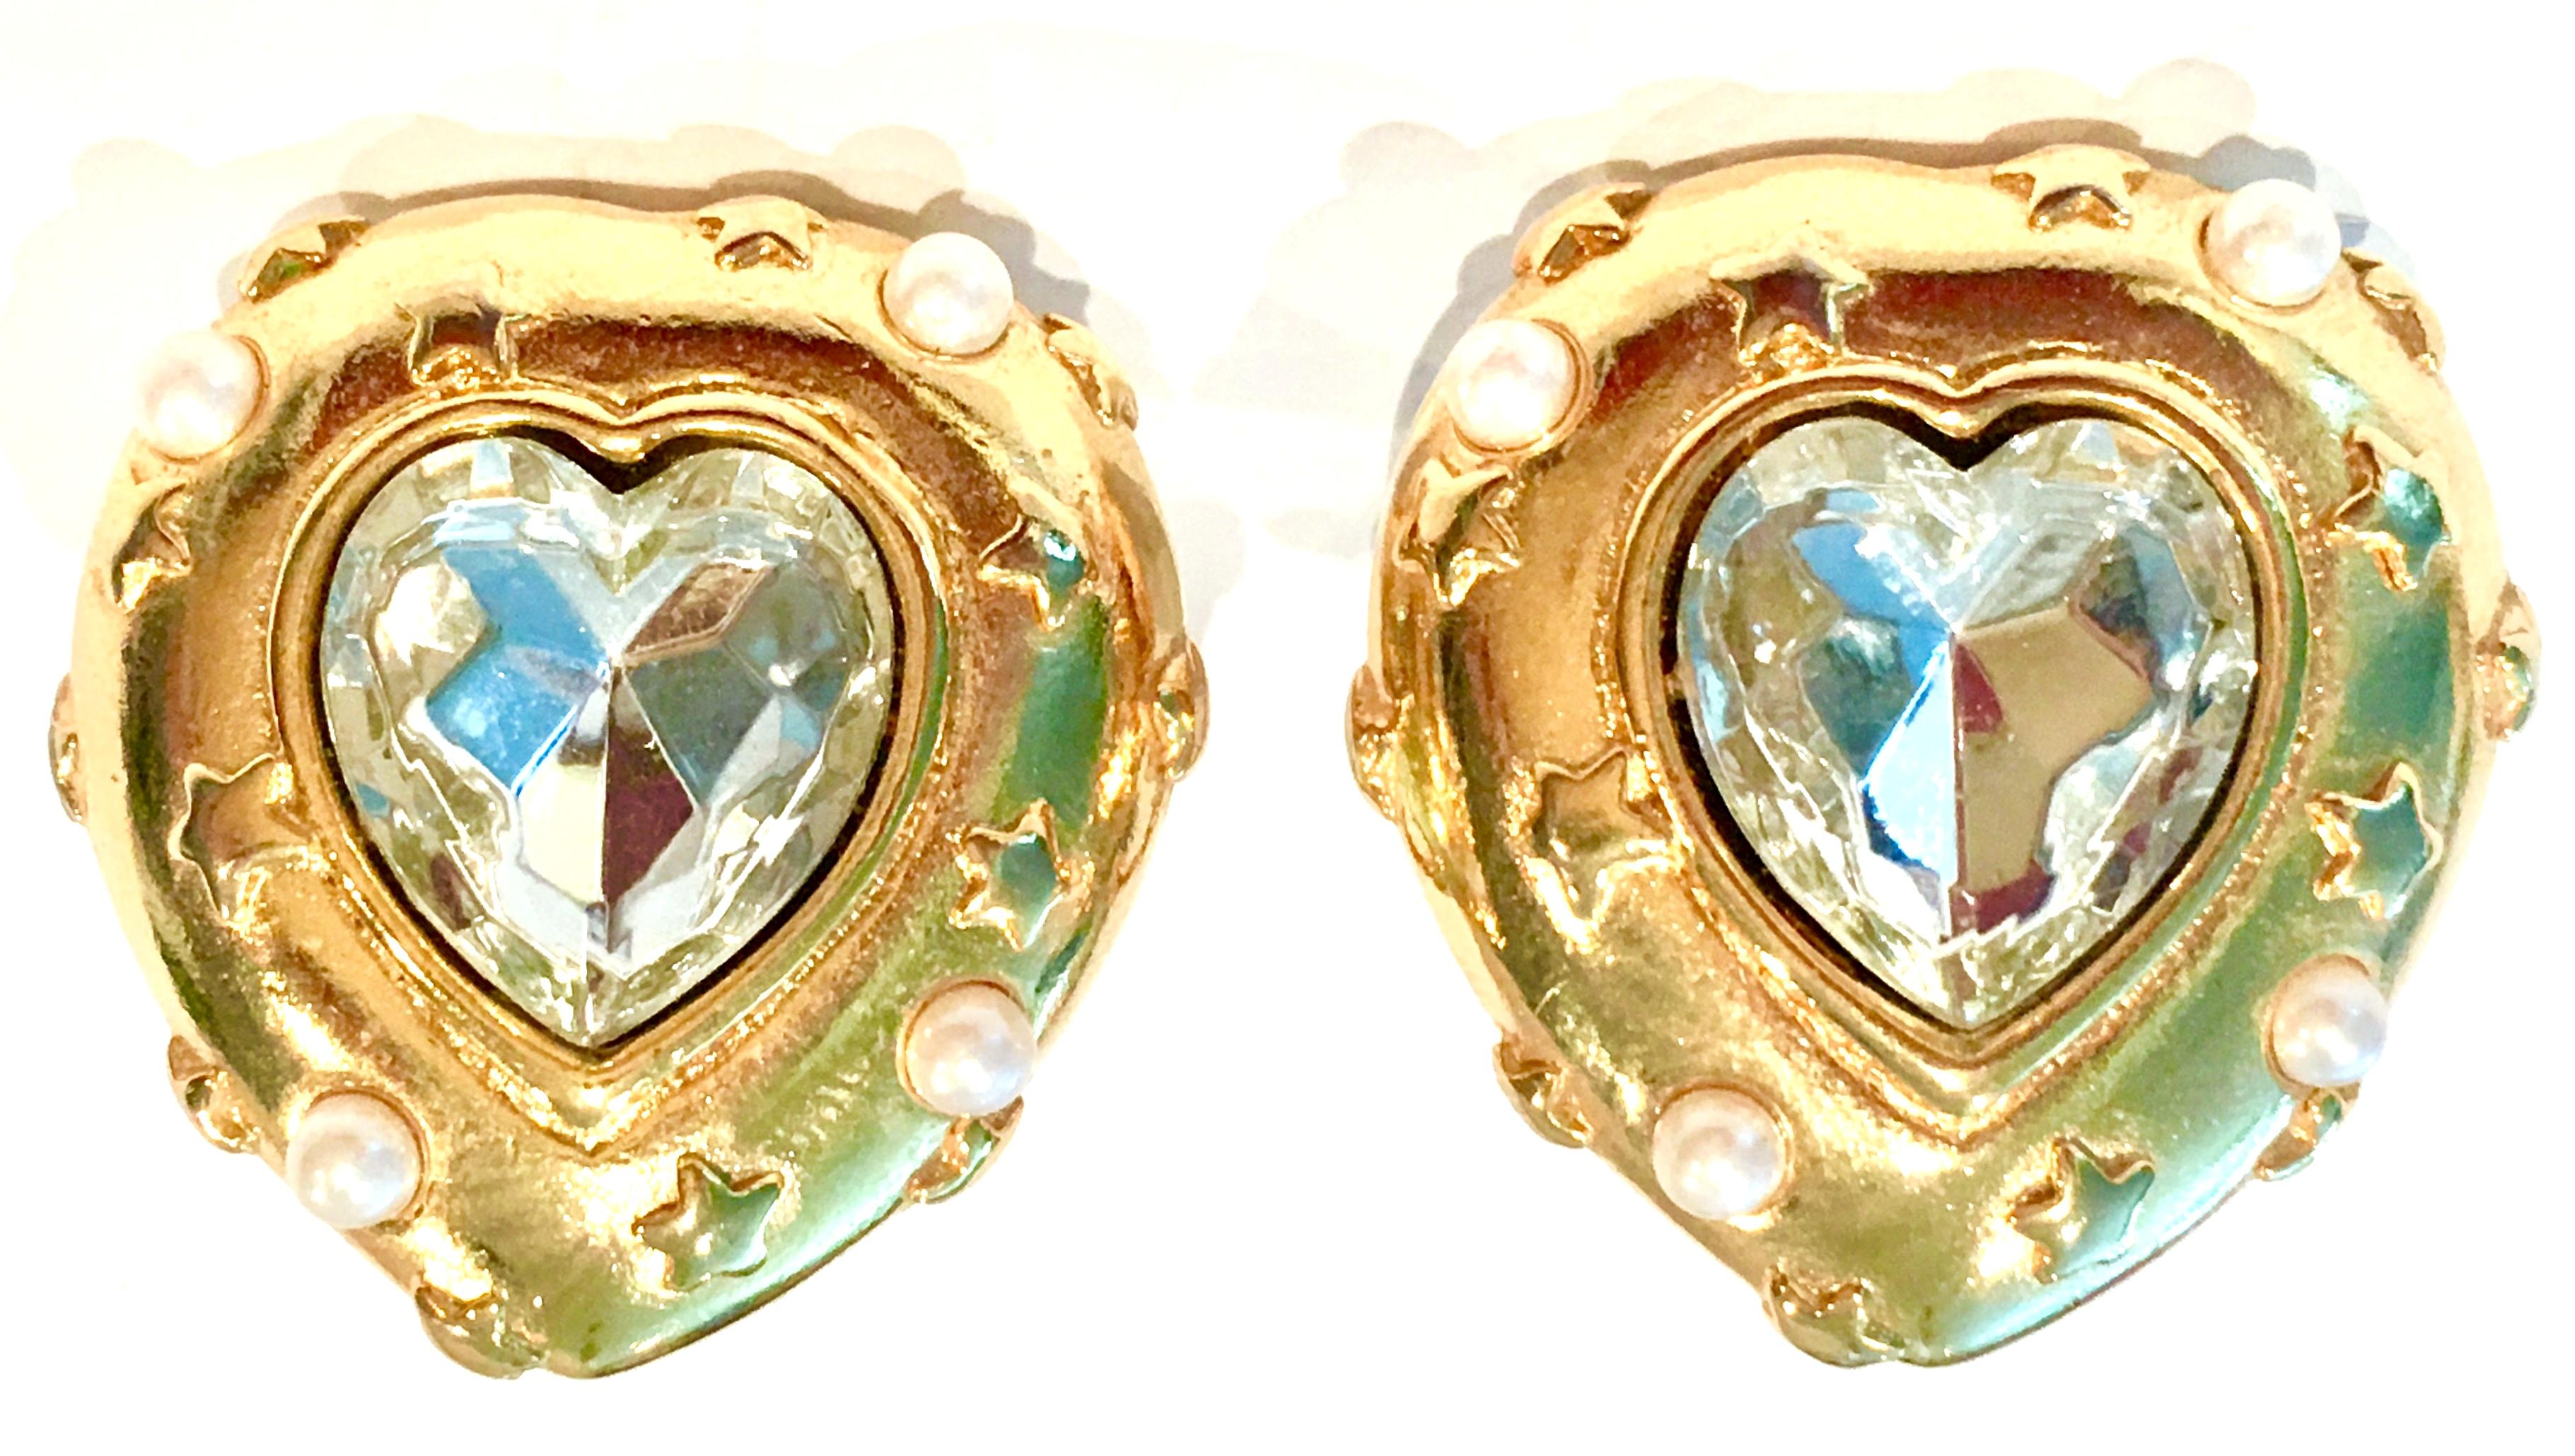 1980'S Gold Plate, Faux Pearl Bead & Faceted Cut Crystal Swarovski Rhinestone Heart & Star Earrings By, Trifari. Features gold plate setting with large central crystal stone, faux pearl beads and raised star detail. Signed on the underside of the